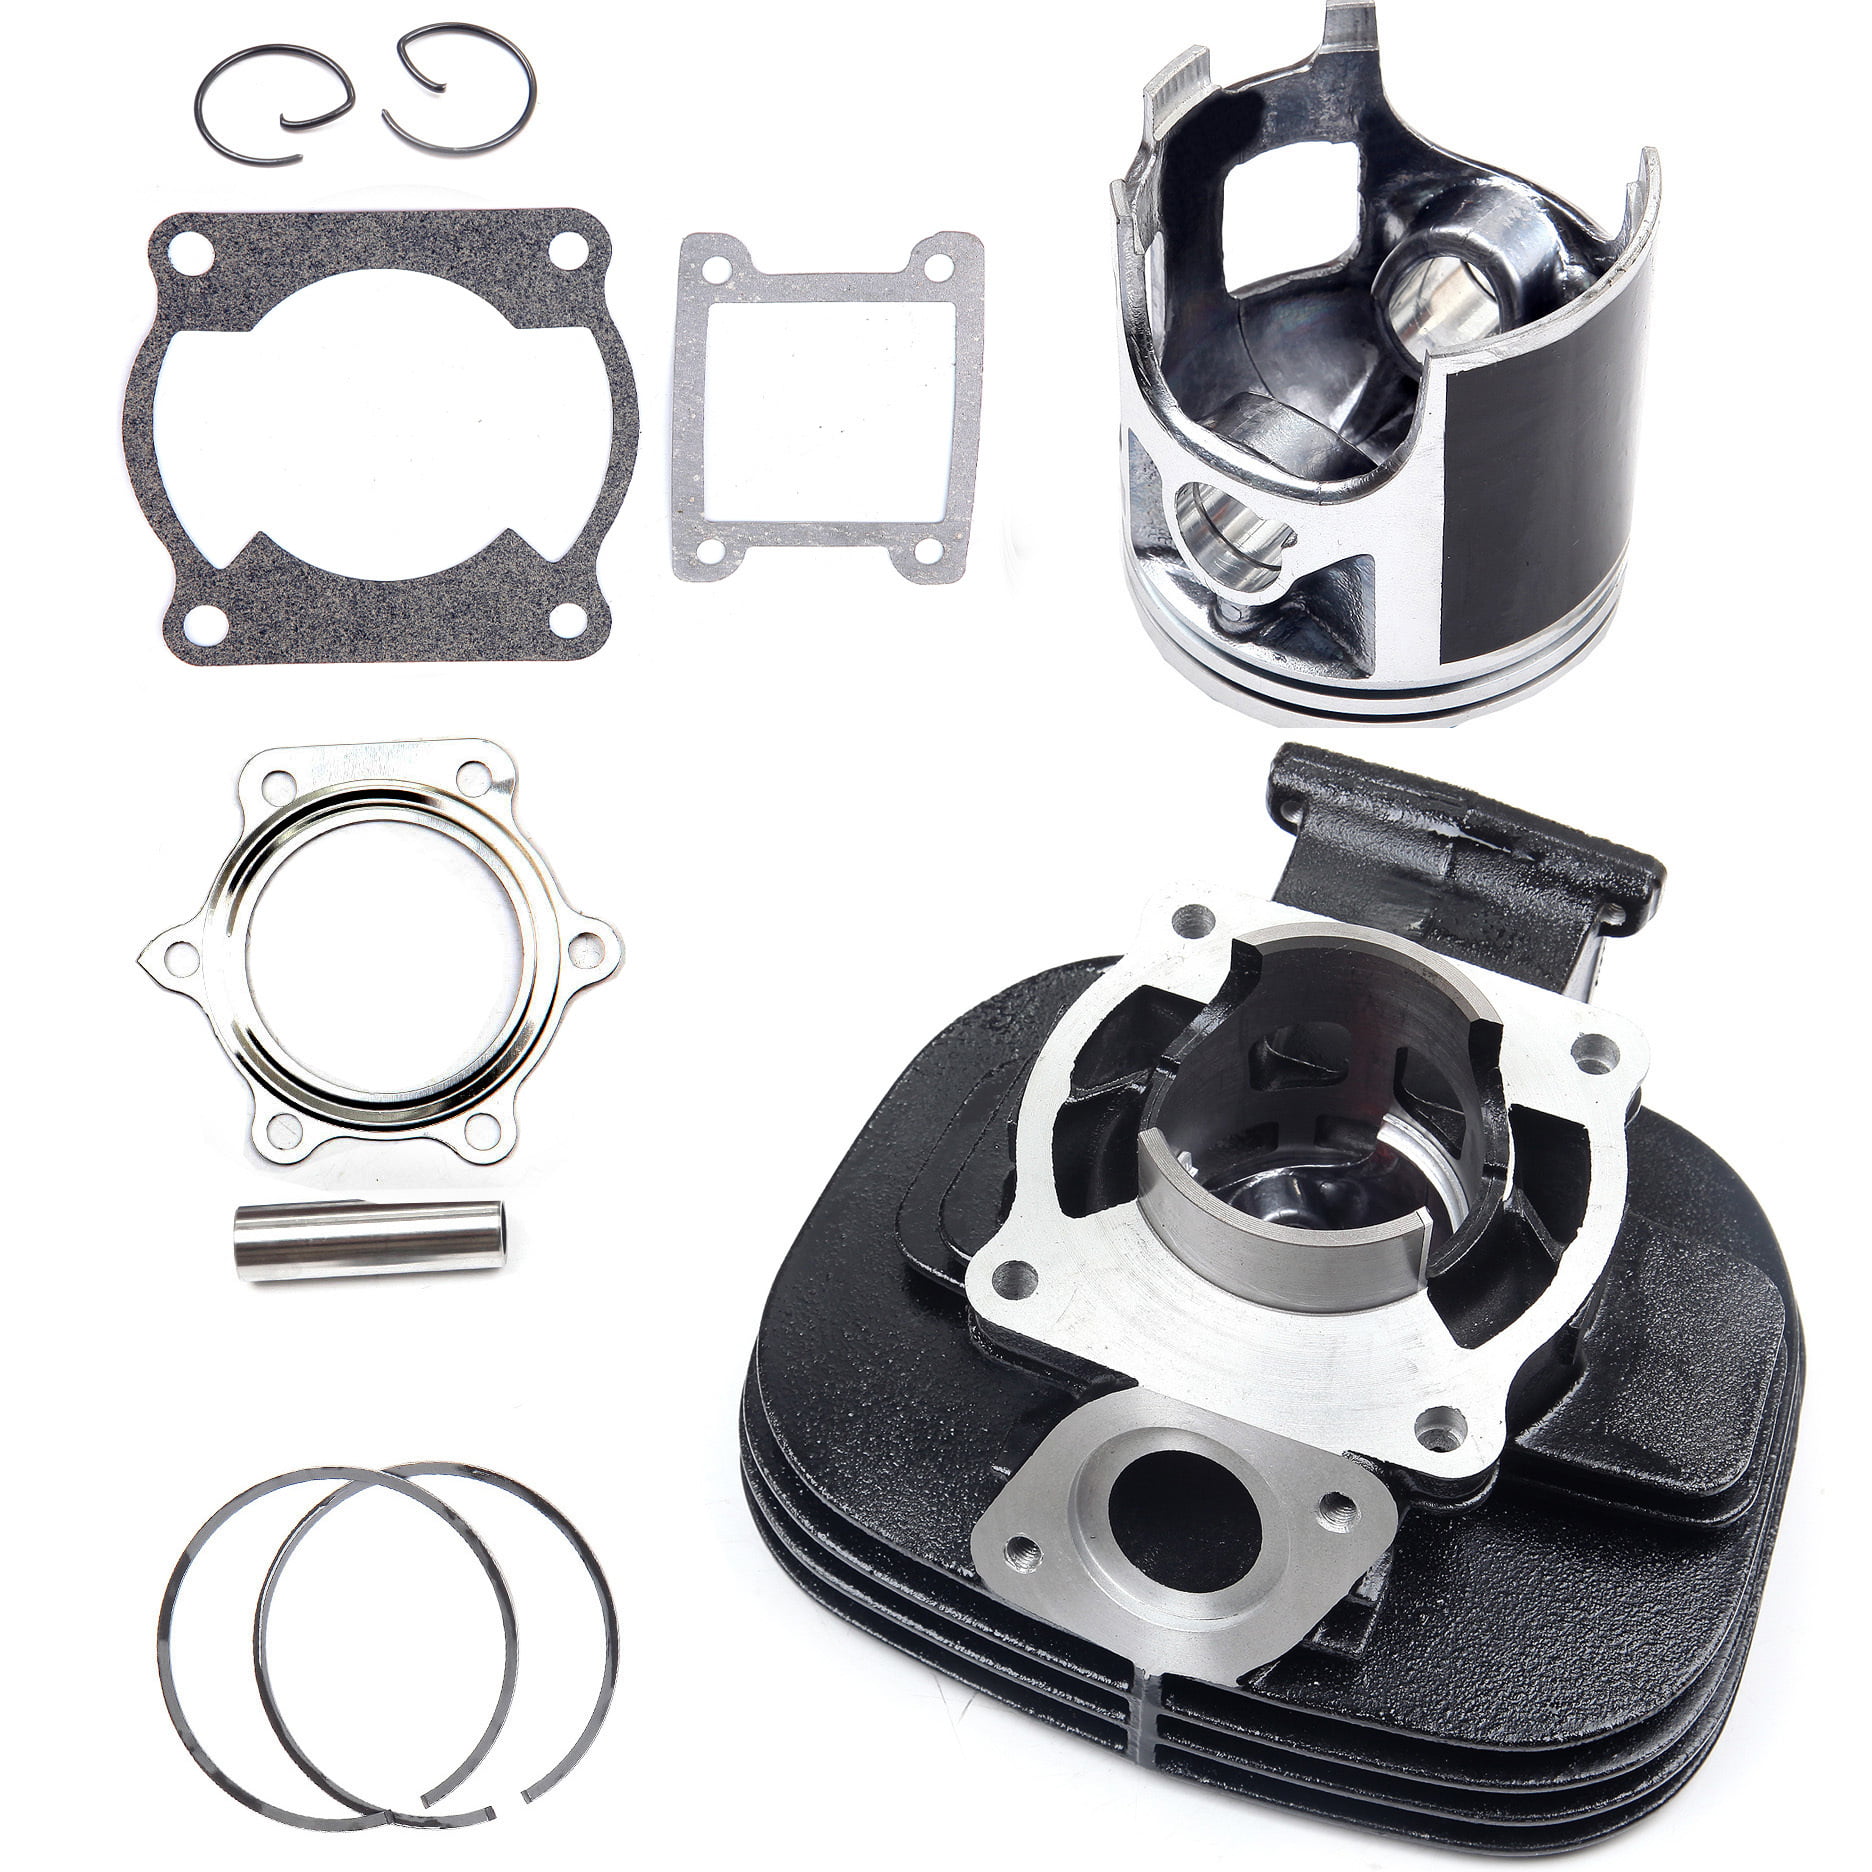 ECCPP New Cylinder Piston Ring Gasket for 1988-2006 for Yamaha Blaster 200  YFS200 YFS 200 Compatible fit for Cylinder Piston Gasket Top End Kit 